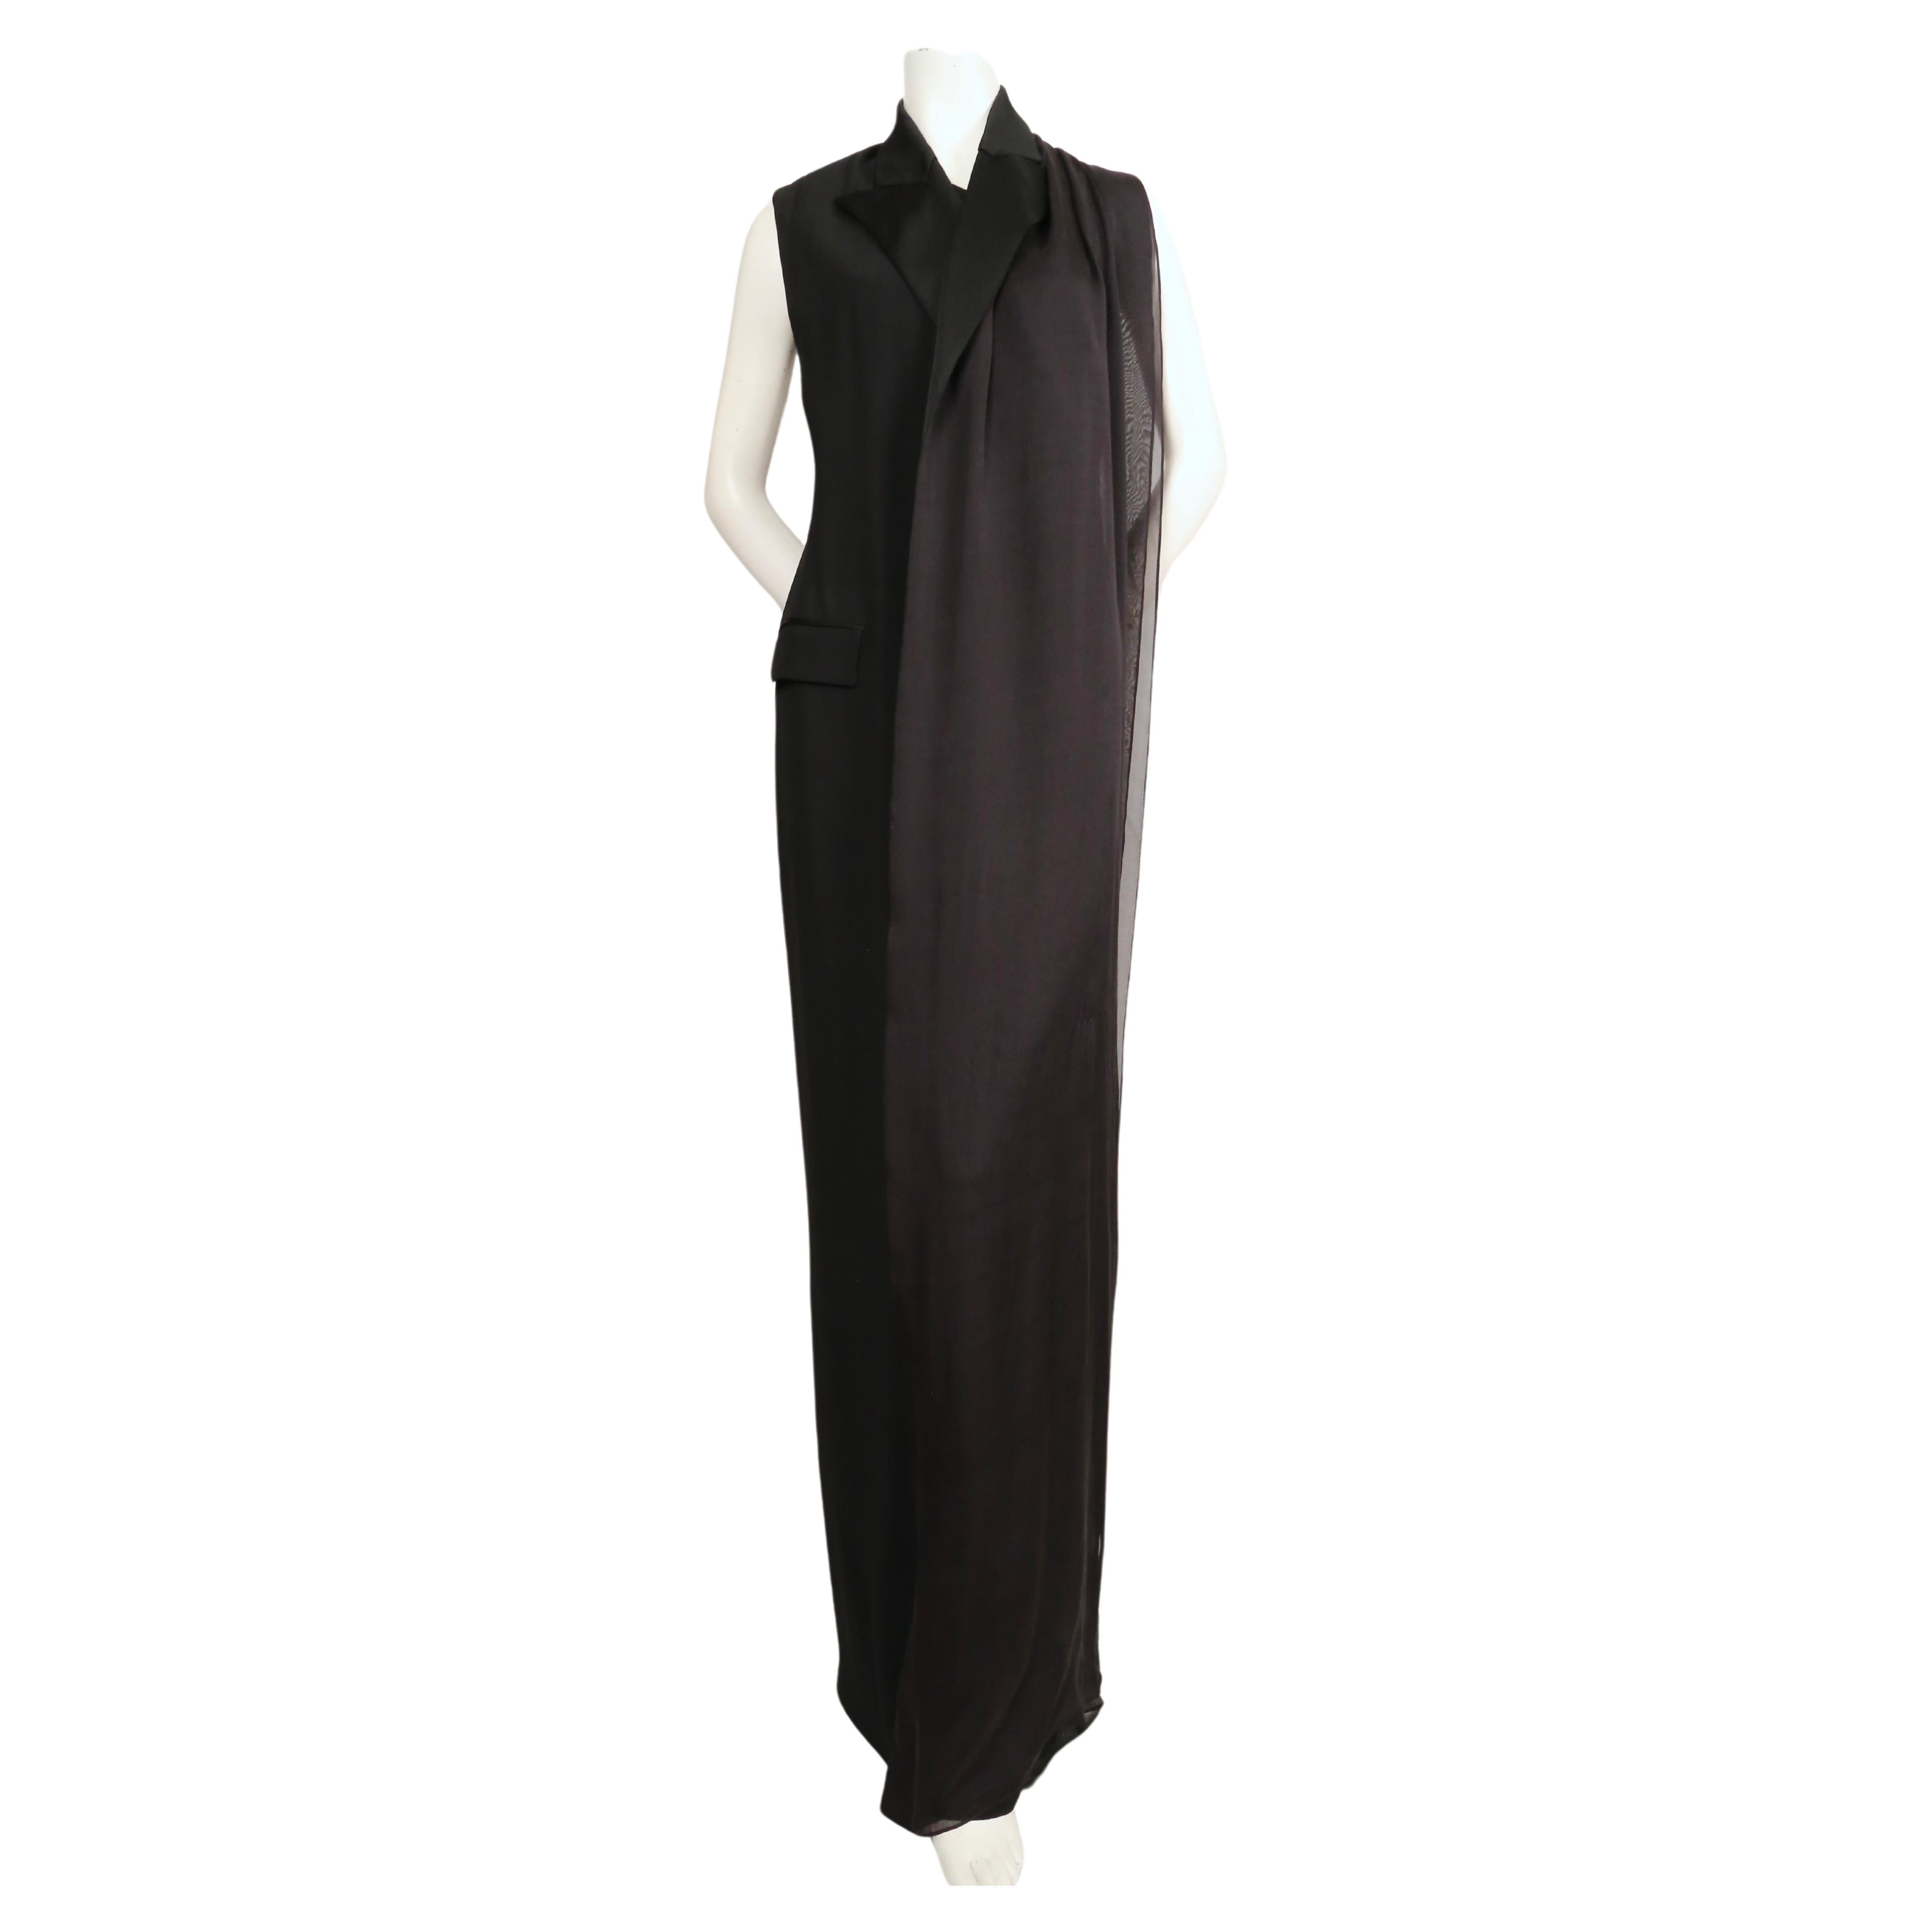 Black tuxedo gown with satin trim and draped silk scarf designed by Jean Paul Gaultier. Labeled a French size 38 (Italian 42). Approximate measurements: 33-34